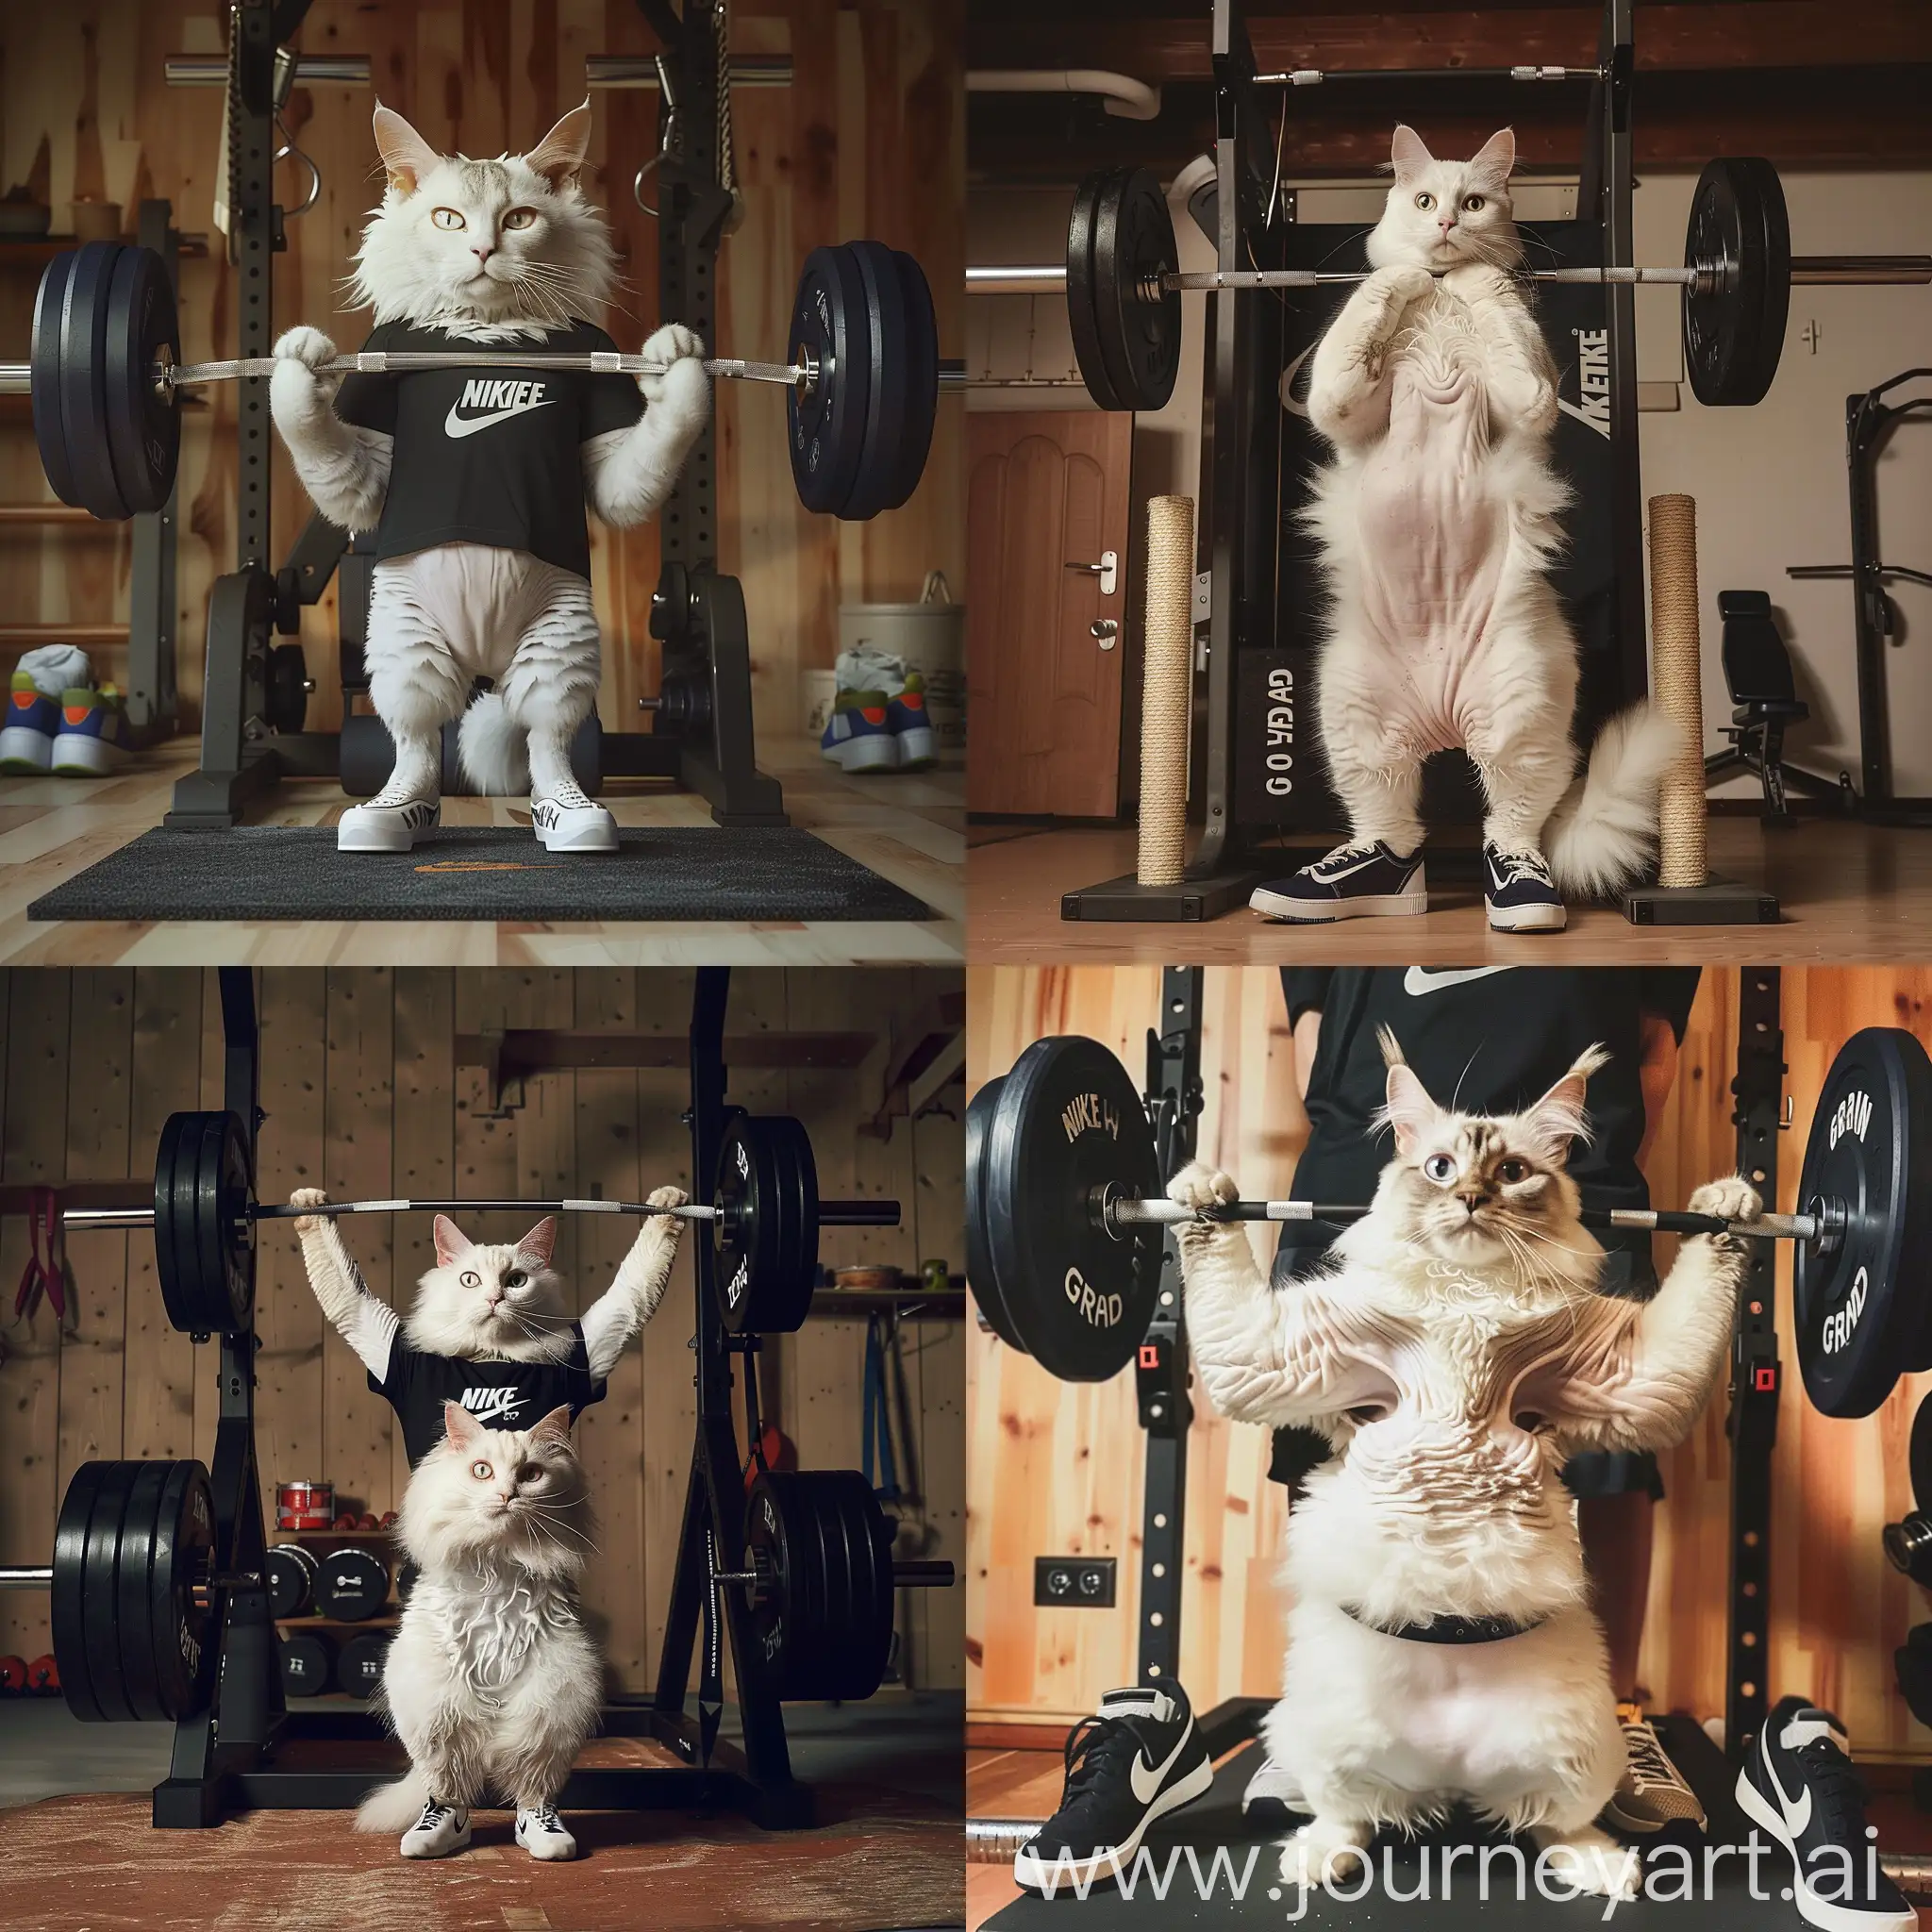 A white Maine Coon cat grew up on chicken and rice, he goes to the gym every day where he pumps his muscles, now he is in the gym and lifts a barbell weighing 150 kilograms, he is wearing NIKE sneakers and a black T-shirt with the text"GRAND"